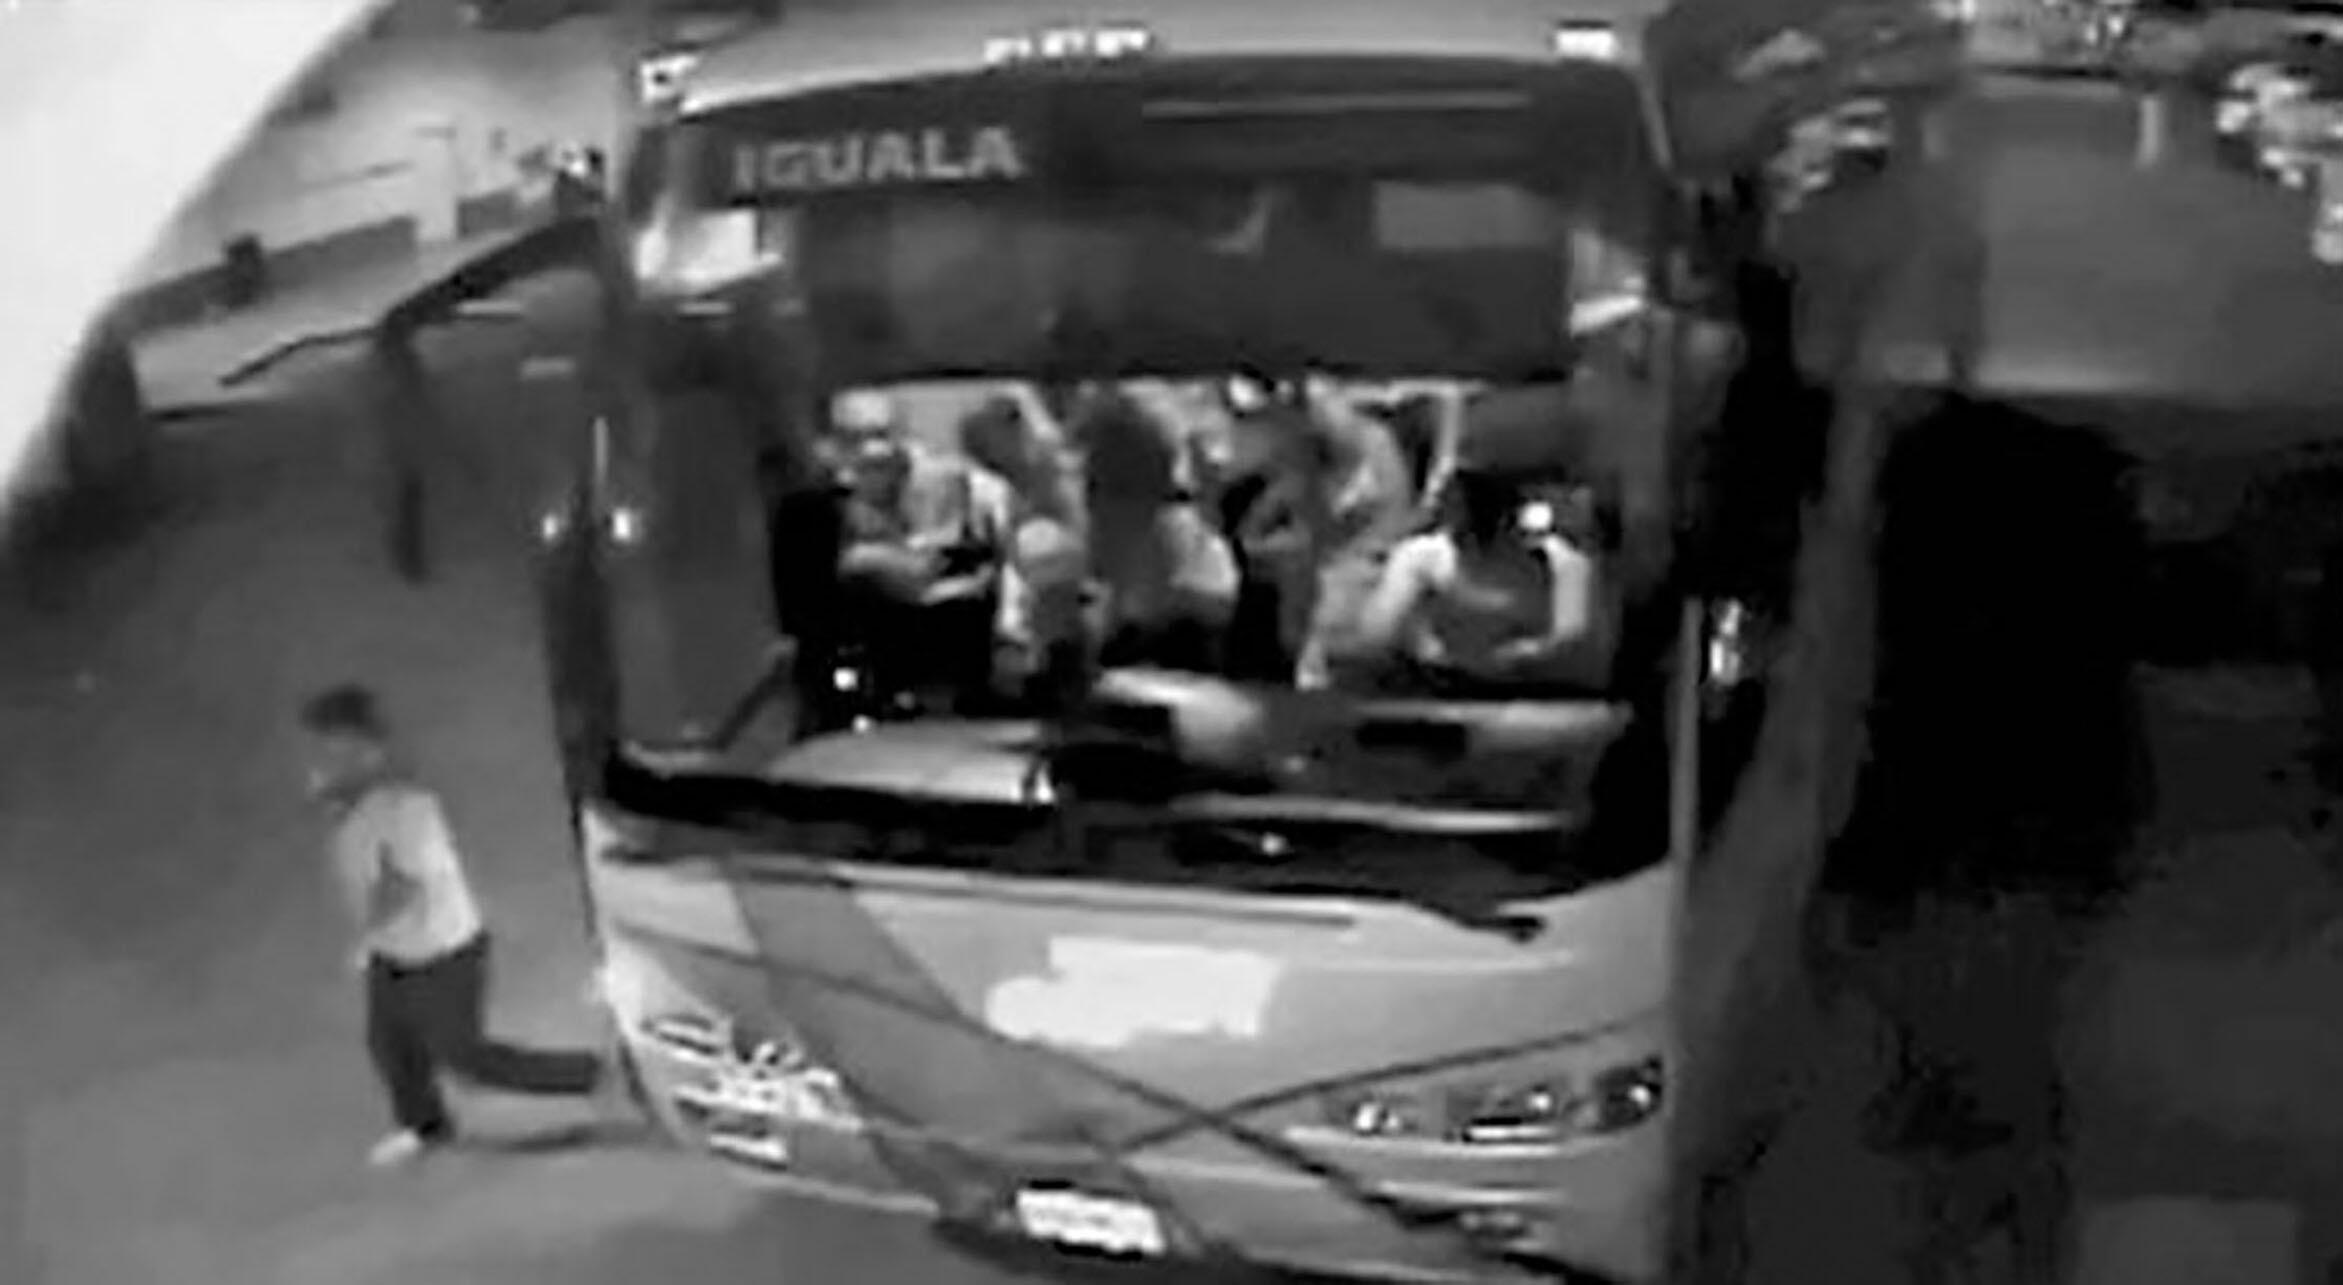 Security camera image of the “fifth bus,” thought to be outfitted for drug smuggling, and the supposed cause of the violence against buses that night. (Photo courtesy of the GIEI.)